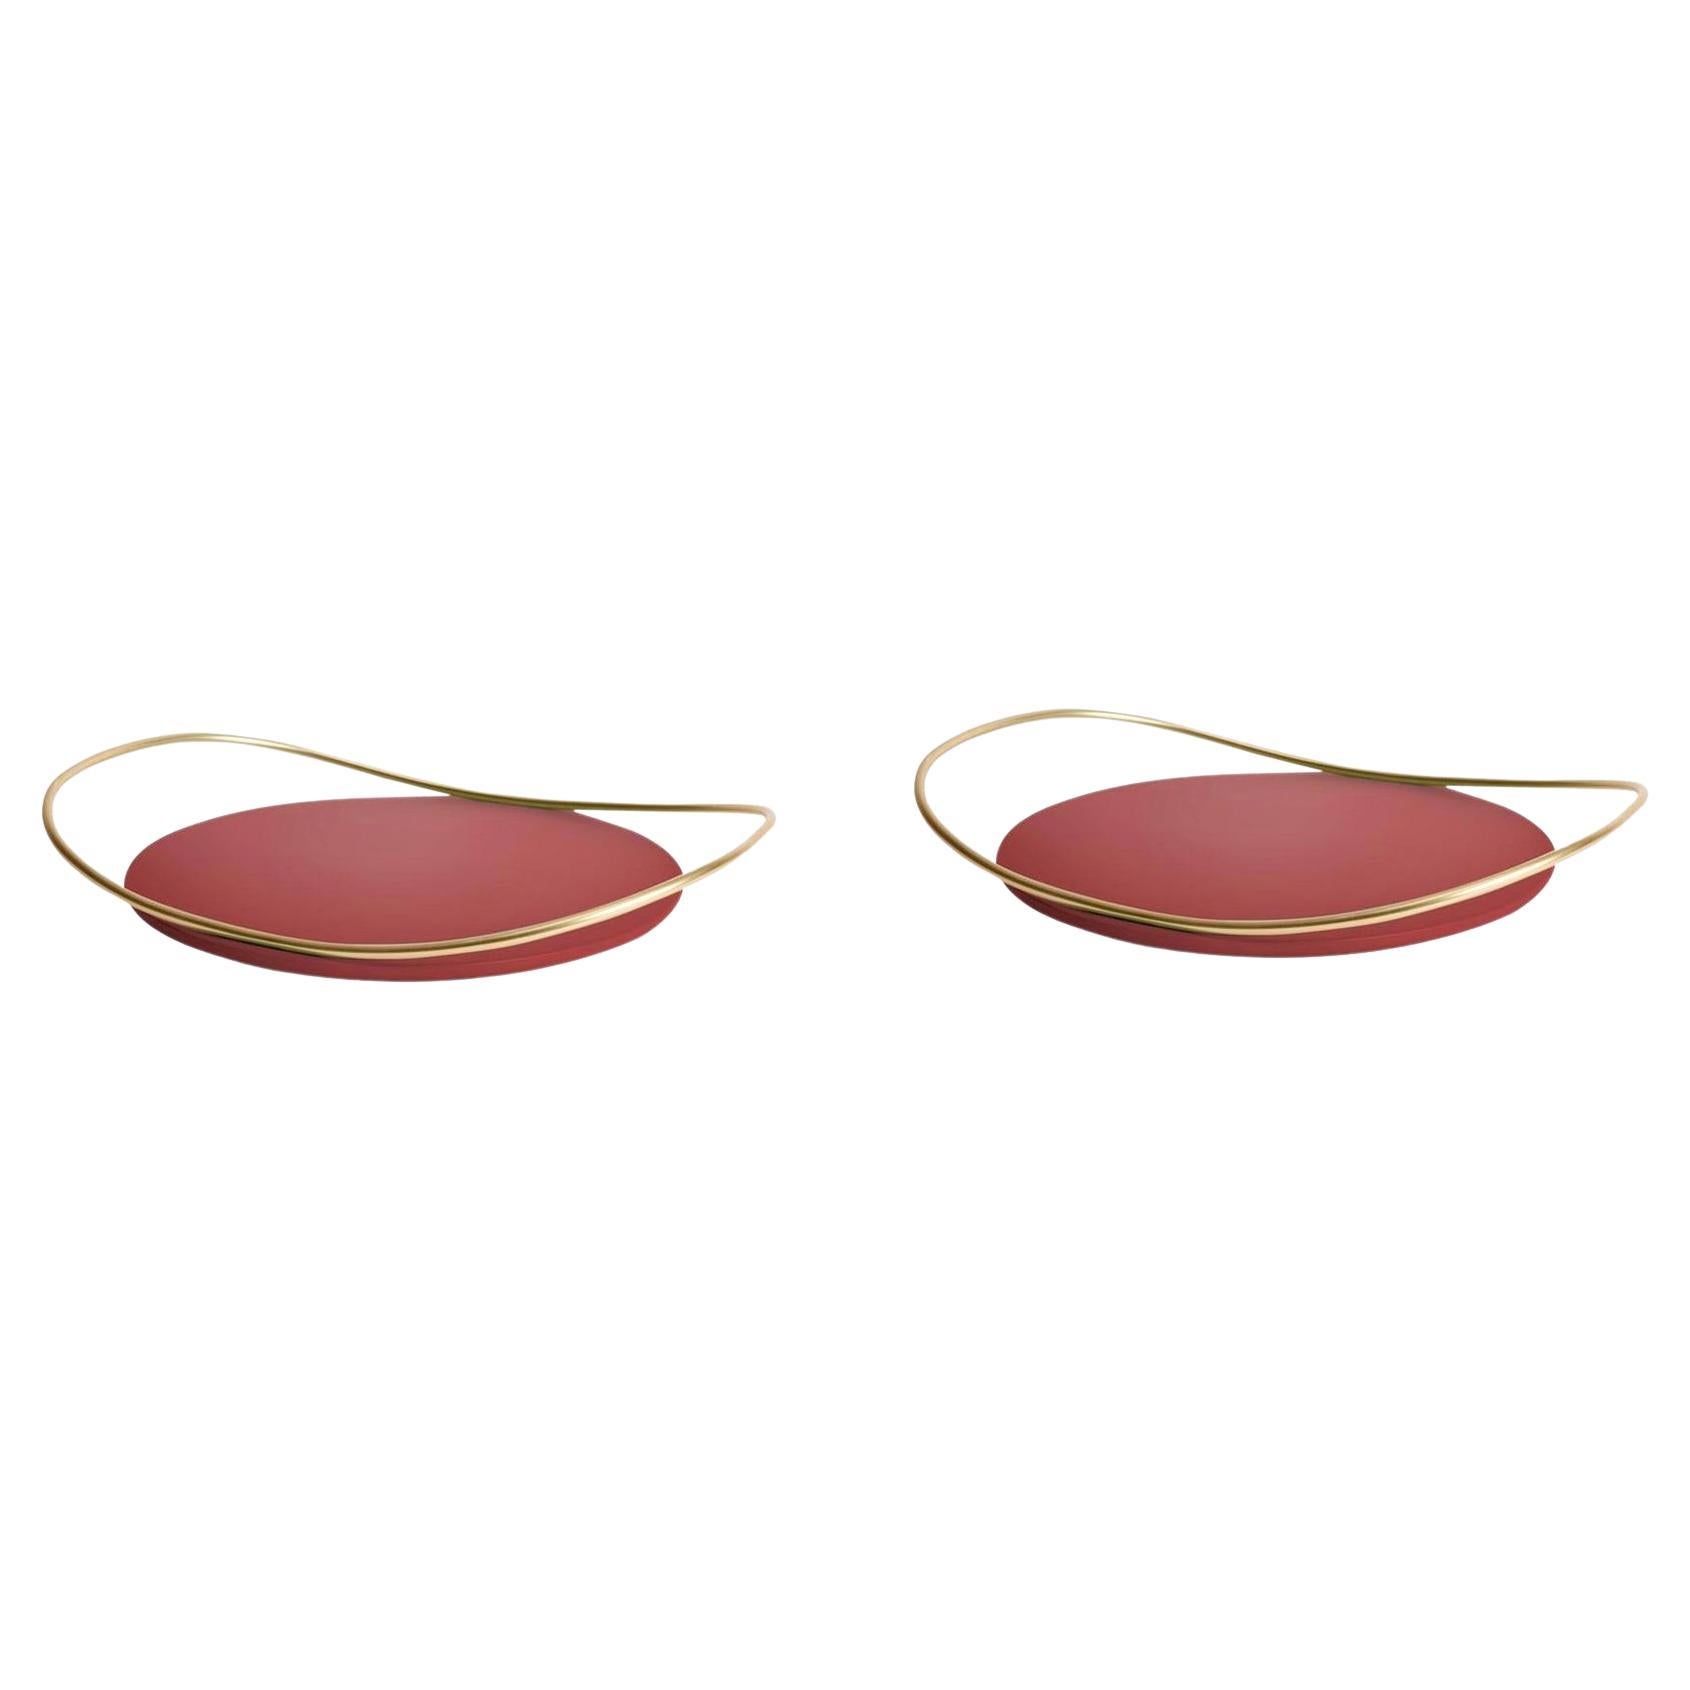 Pair of Burgundy Touché B Trays by Mason Editions For Sale